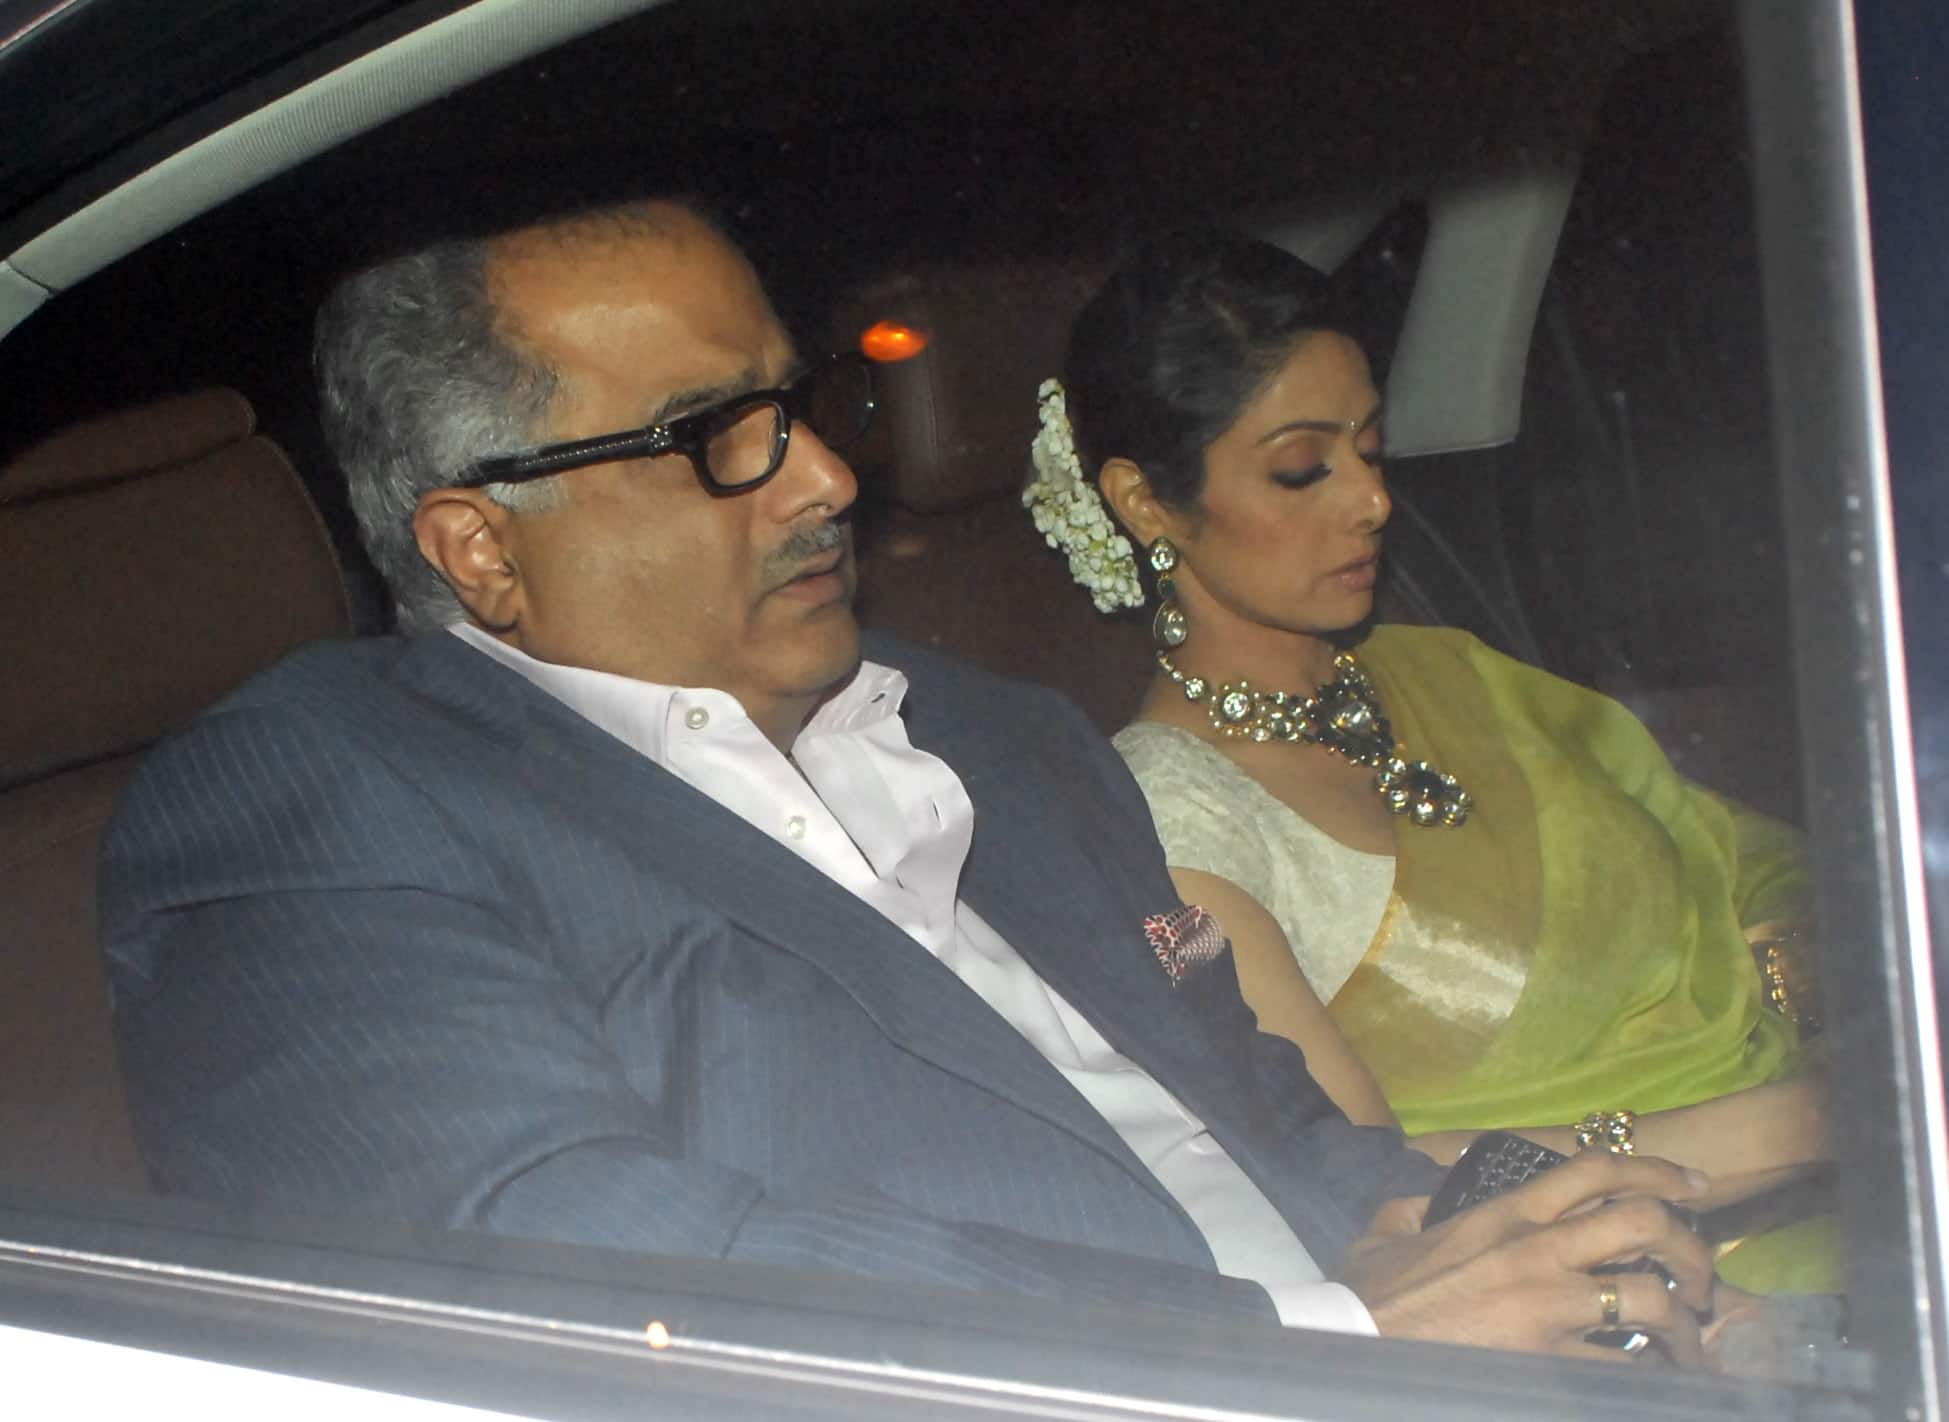 This is how Boney Kapoor fell in love with the diva Sridevi controversial relationship Sridevi Boney love story